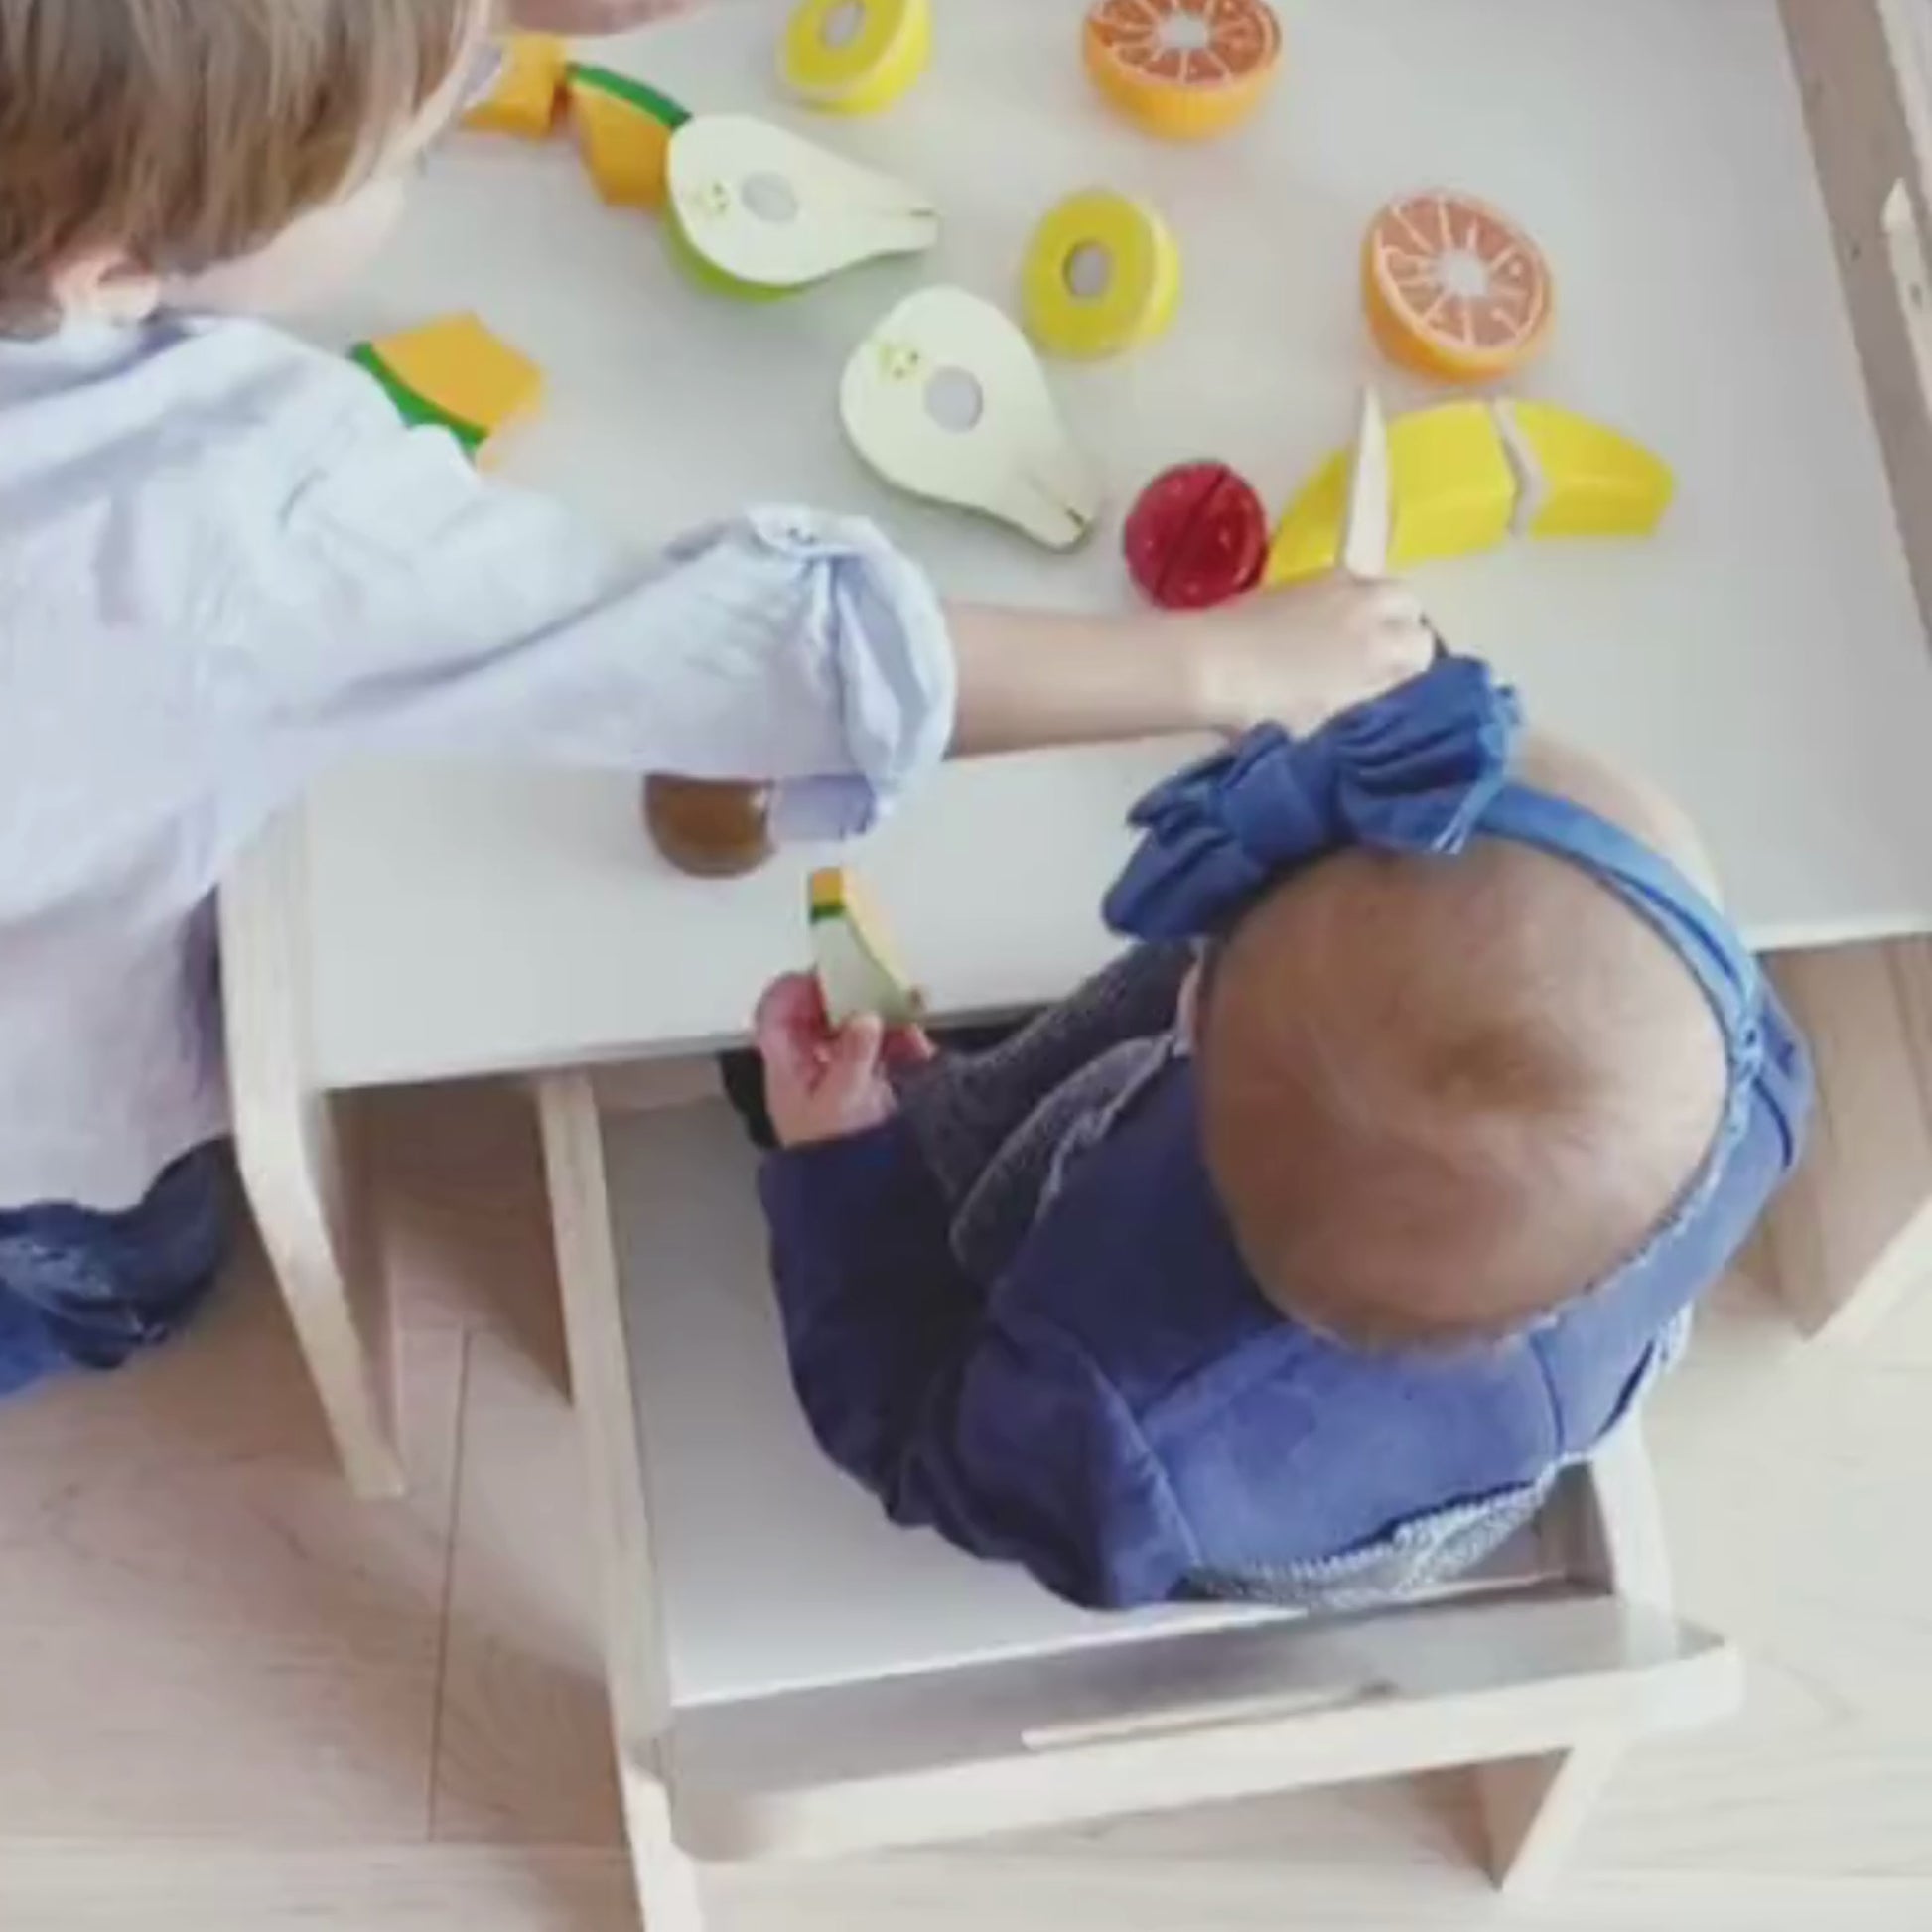 Adjustable Montessori Weaning Chair & Table Set